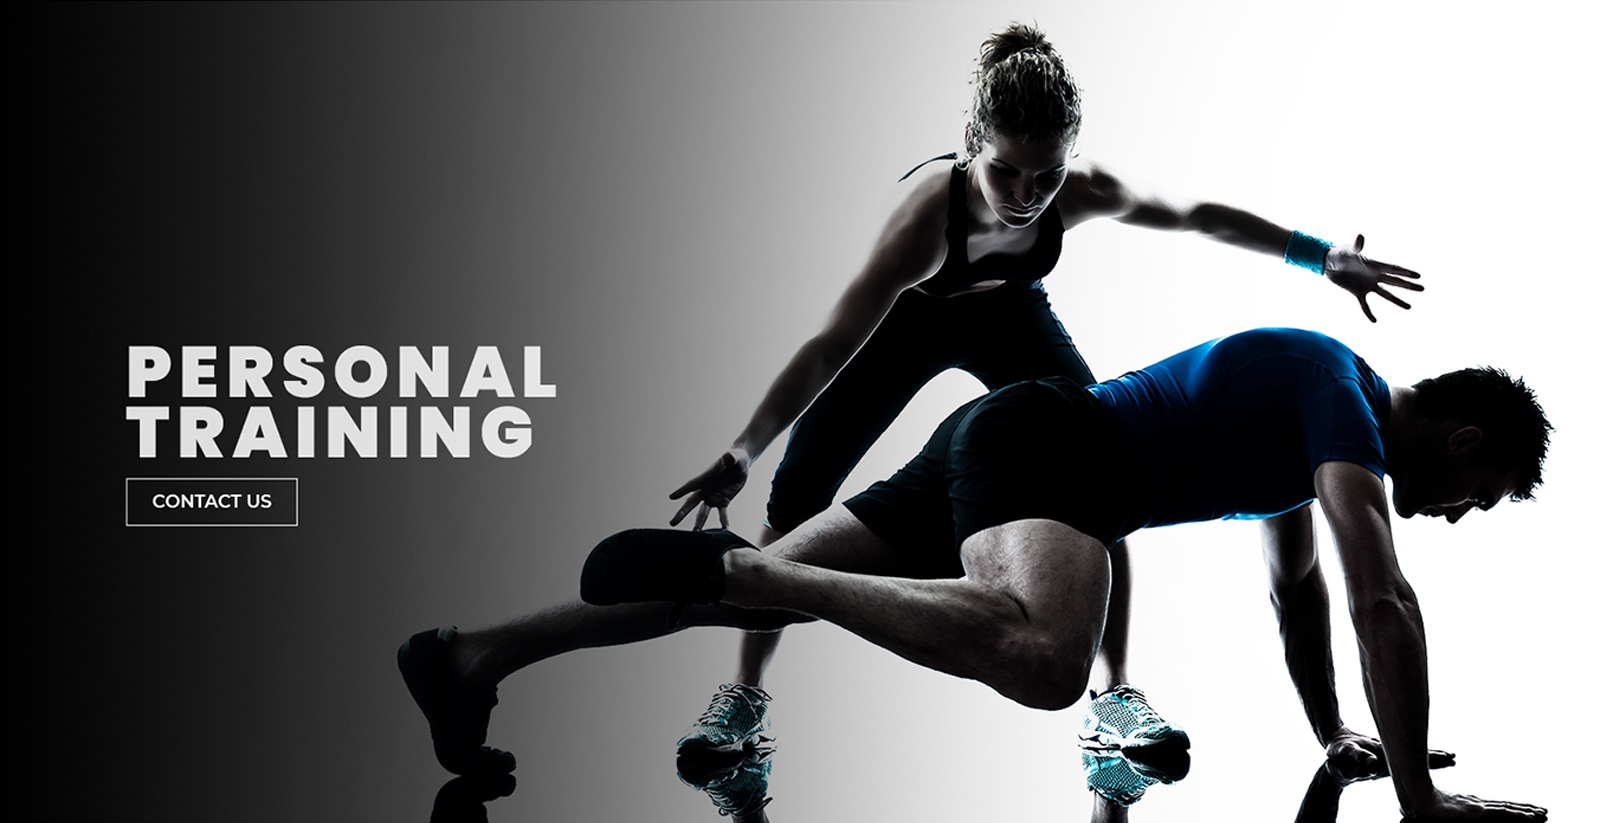 Personal Training Services by Toronto Personal Fitness Trainer - Power Institute